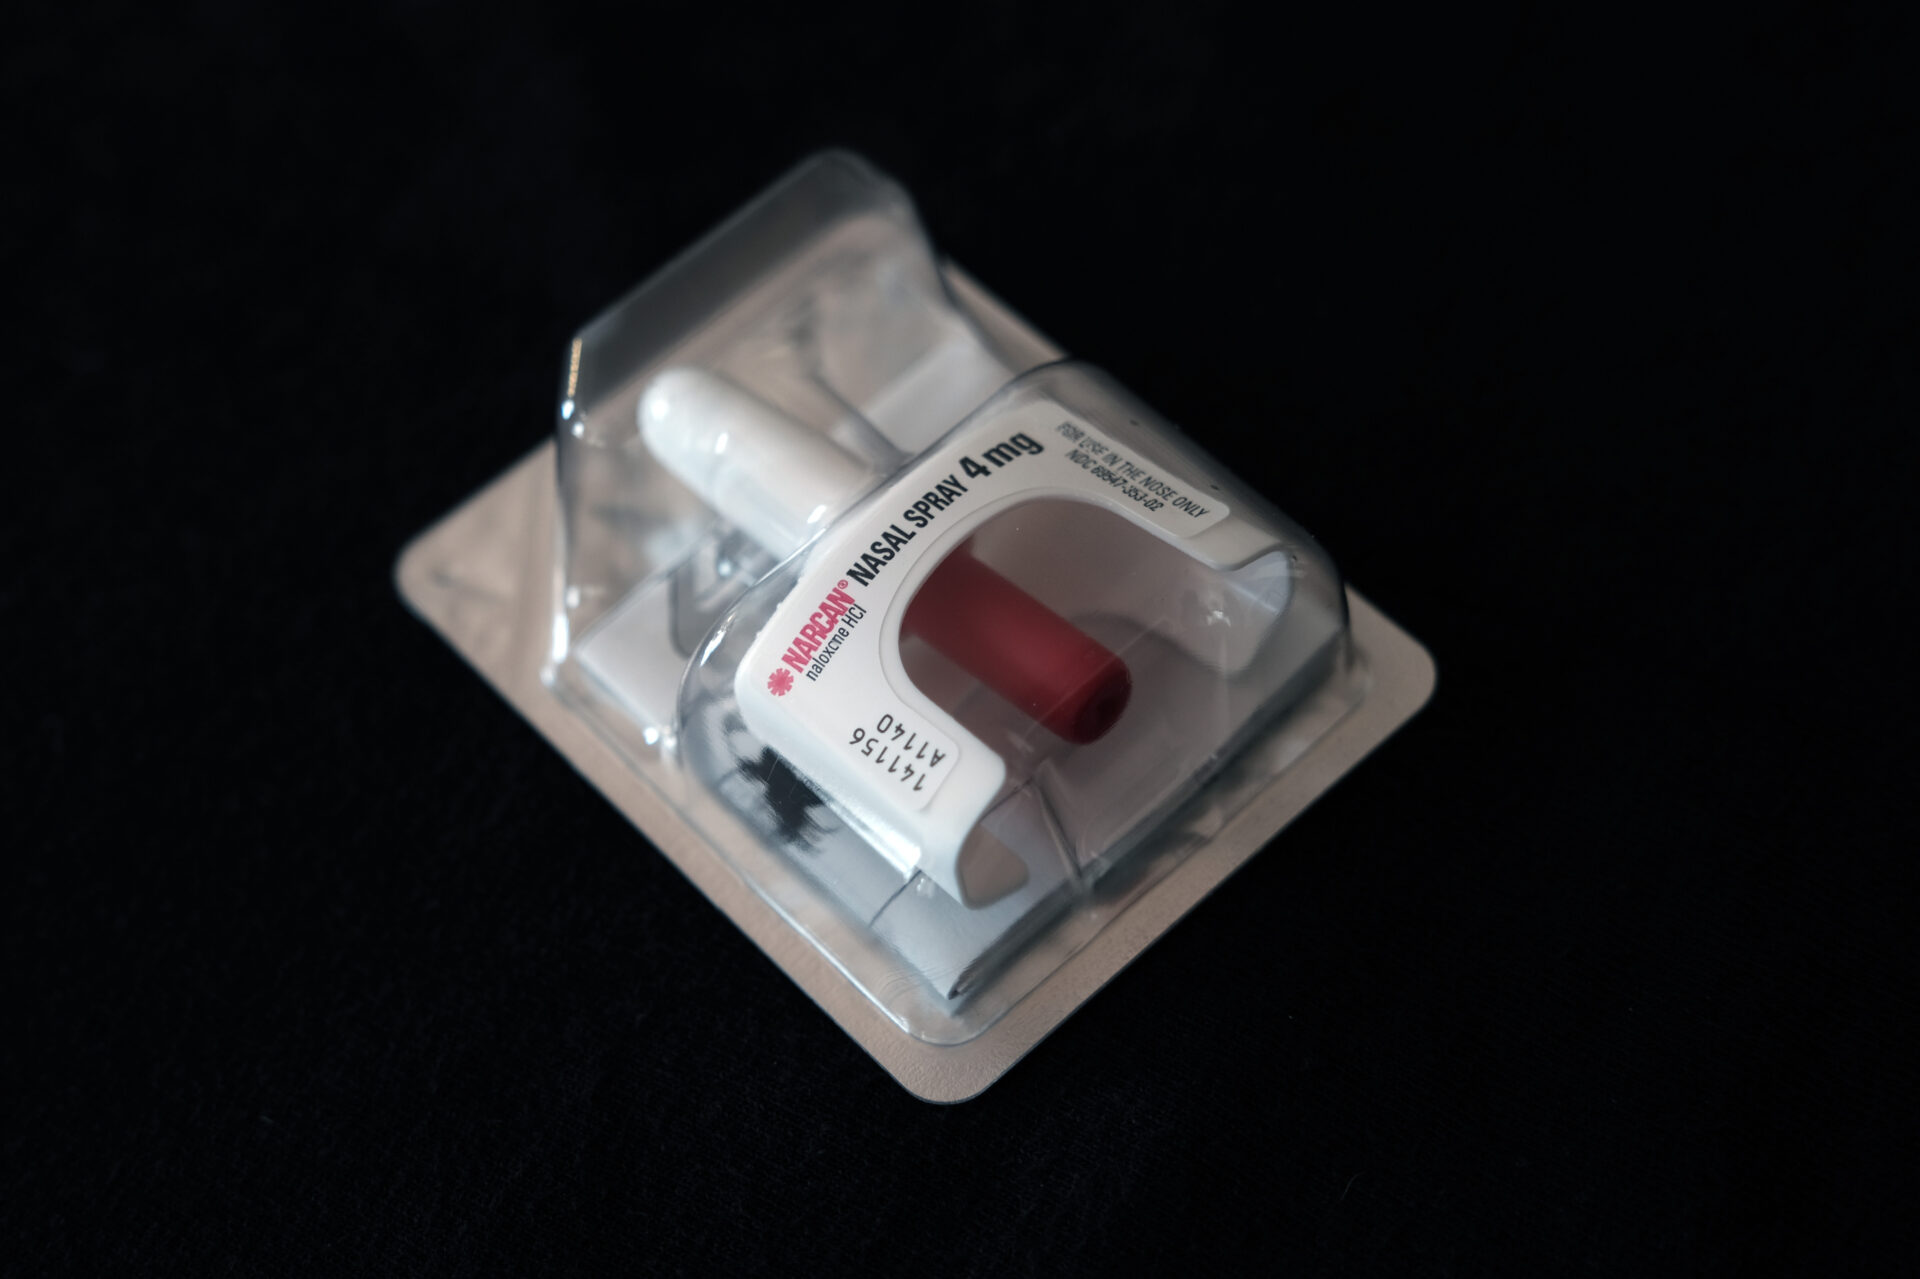 Save A Life Day To Distribute Narcan